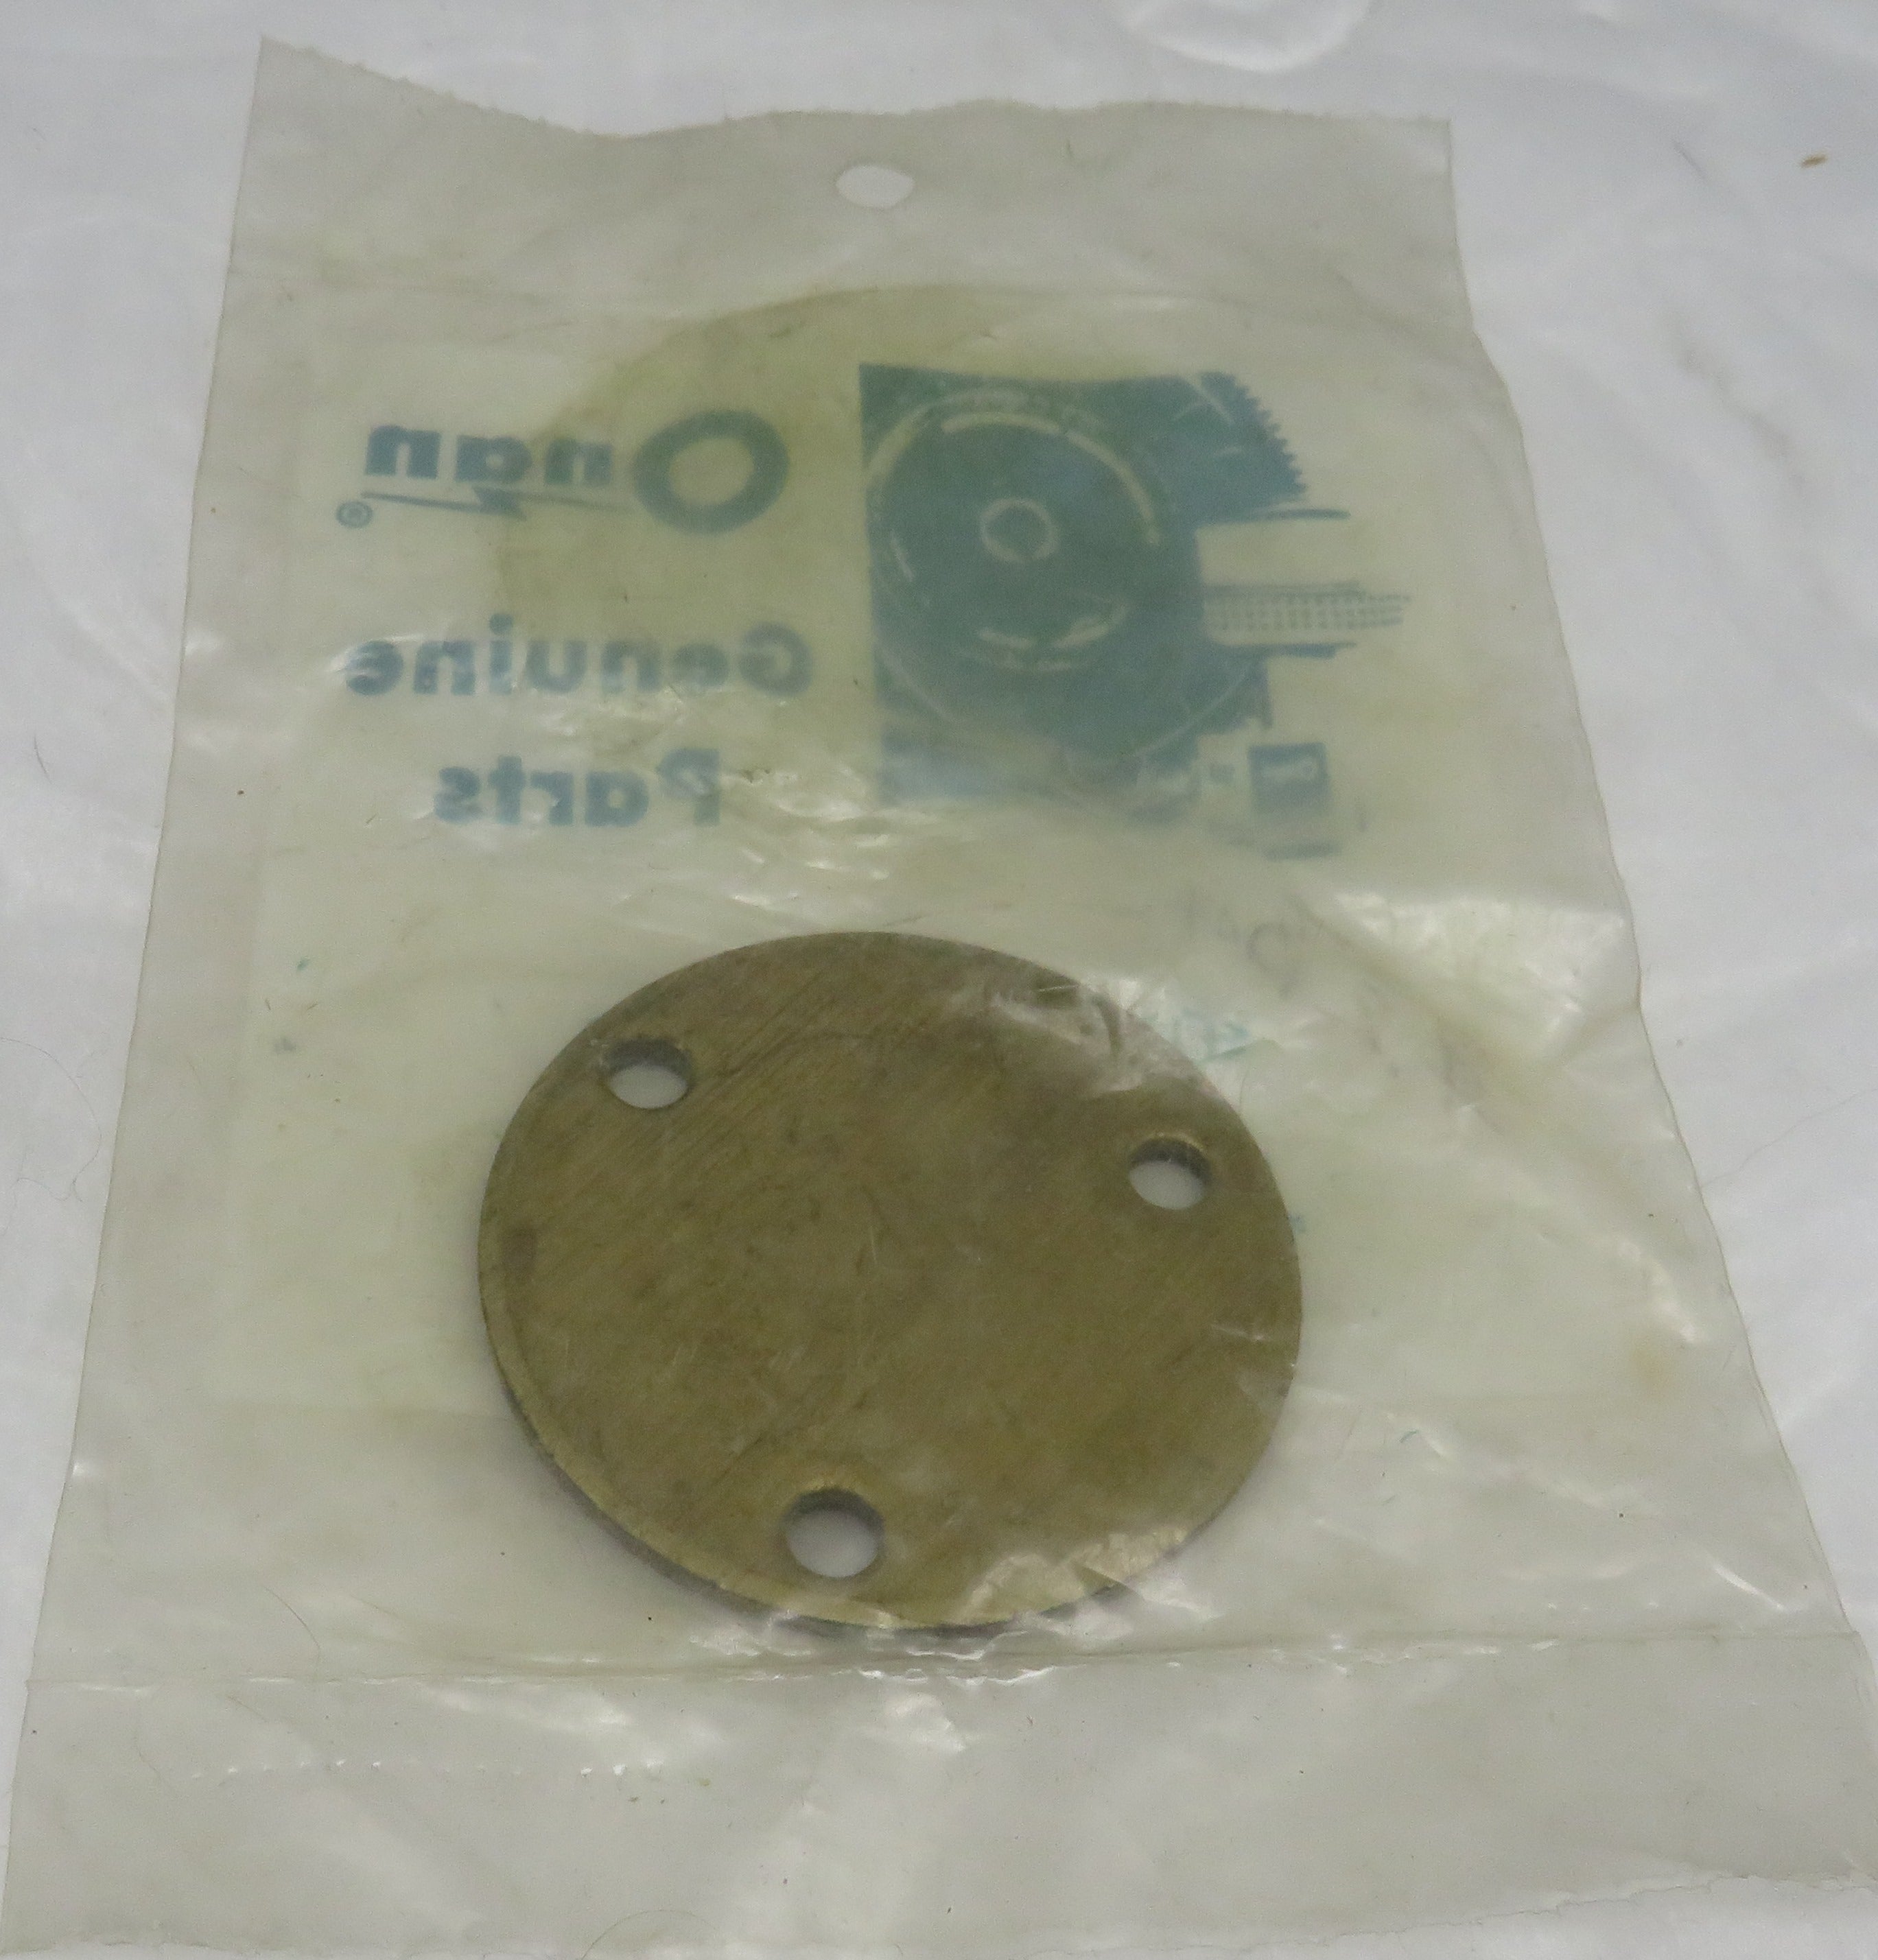 Onan 131-0042 Water Pump Cover OBSOLETE For MAJ For MAJ goes with 131-0050 Impeller & 131-0045 Pump Body 4/16/2024 THIS PART IS IN STOCK 4/16/2024